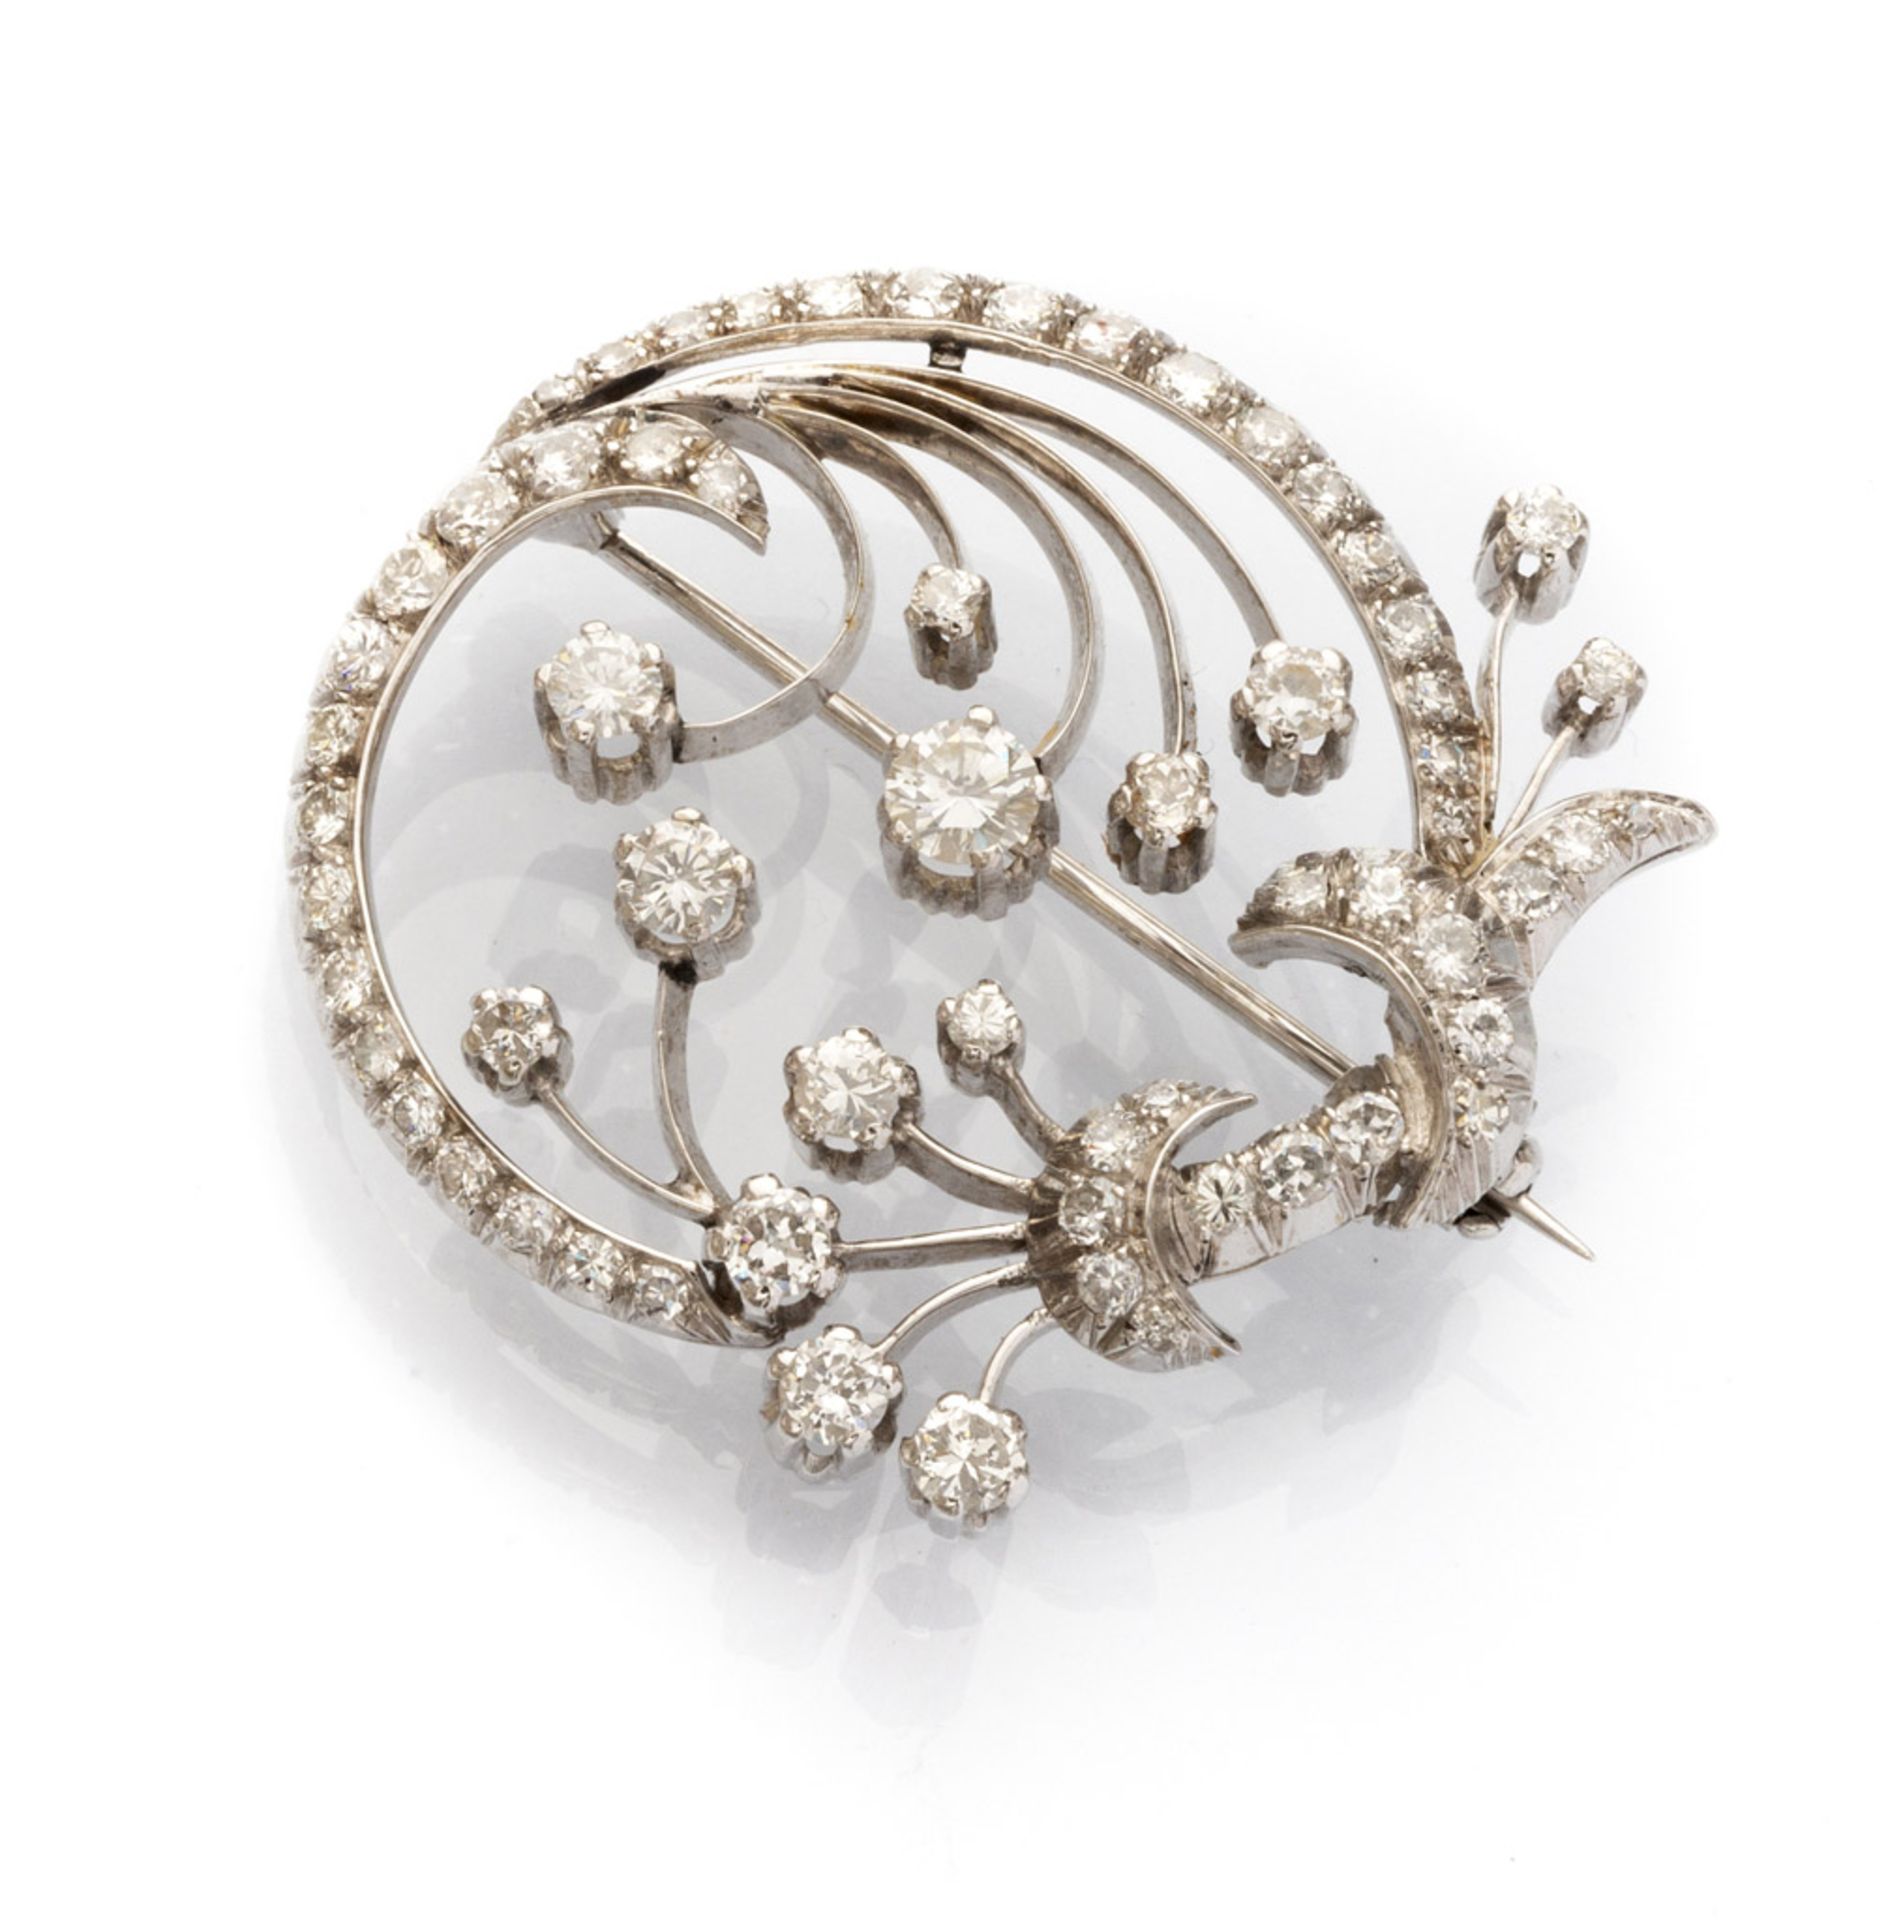 BEAUTIFUL BROOCH in white gold 18 kts., stylized peacock design with round diamonds of various